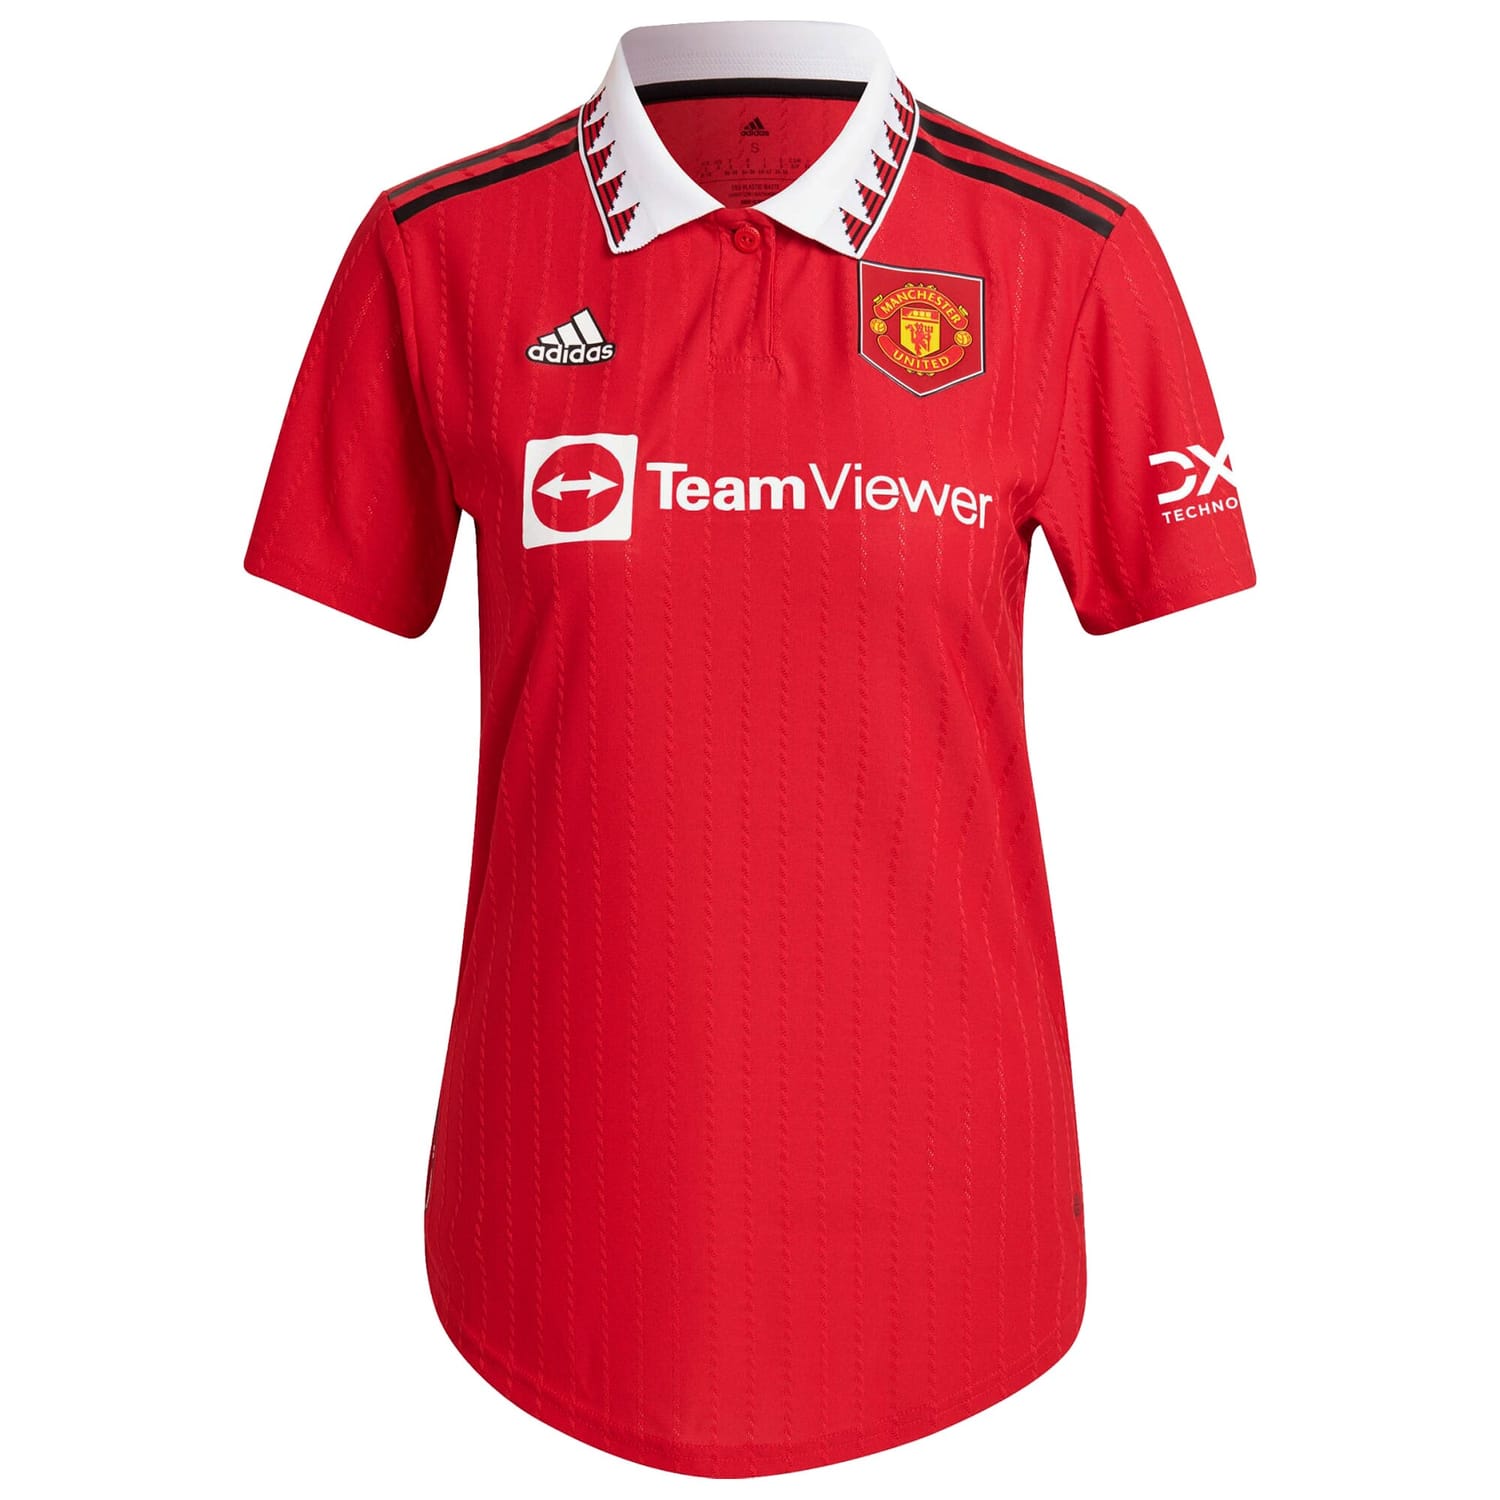 Premier League Manchester United Home WSL Authentic Jersey Shirt 2022-23 player Lisa Naalsund 16 printing for Women